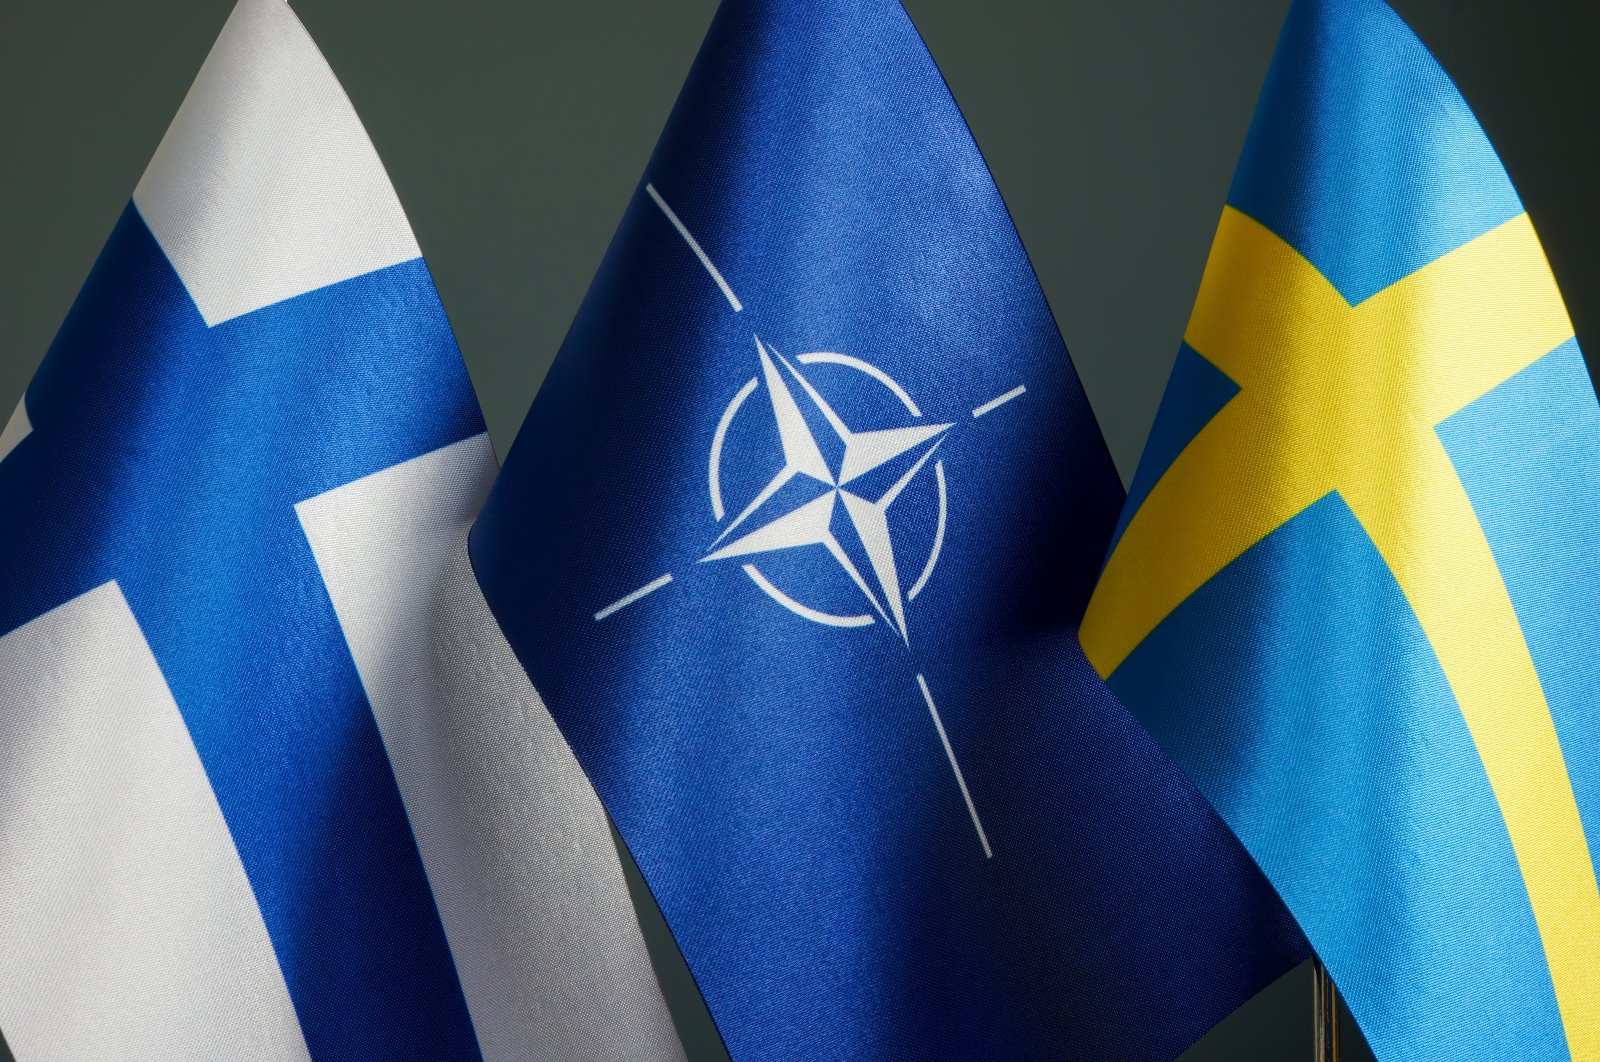 The flags of Finland, NATO and Sweden. (Photo by Shutterstock)